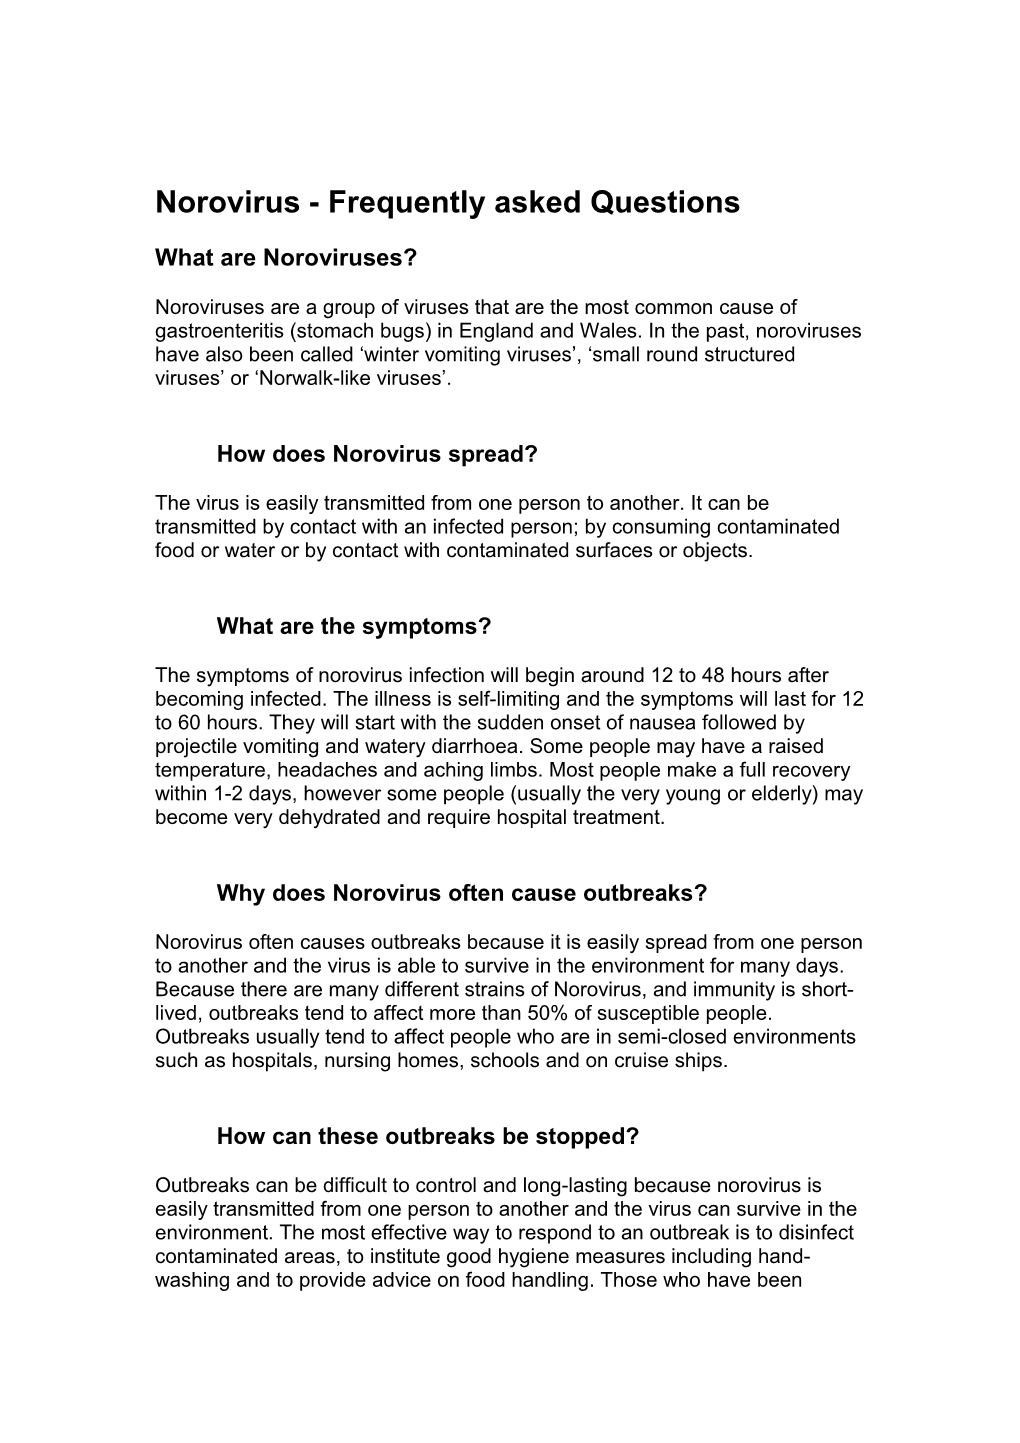 Norovirus - Frequently Asked Questions